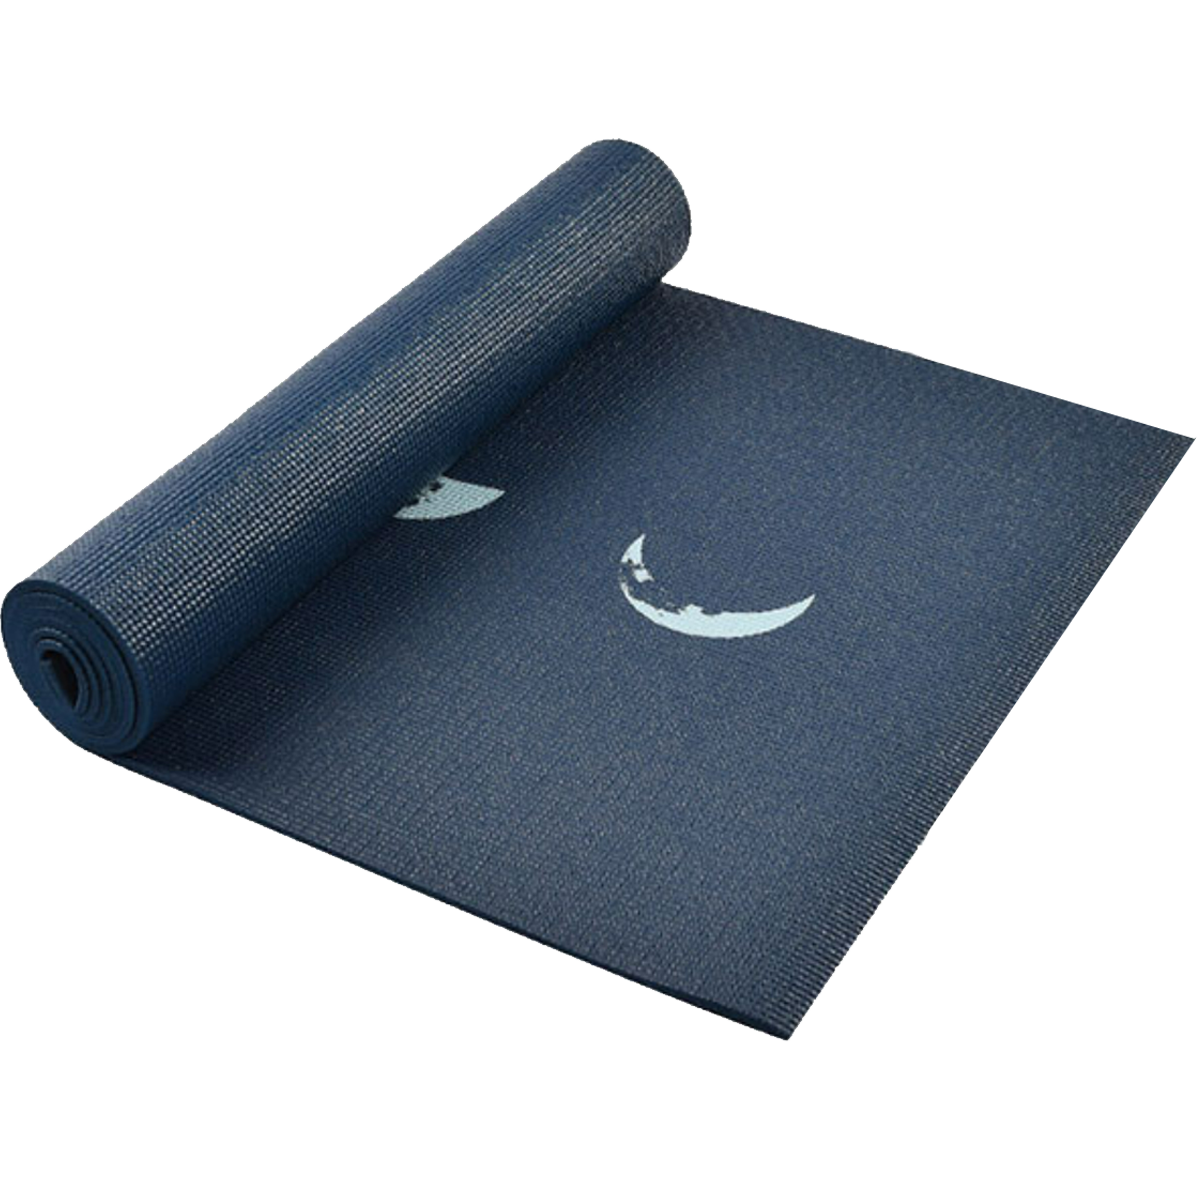 Portable Foldable Yoga Mat - Lightweight, Non-Slip - 1/8 inch Thick - 68 x  24